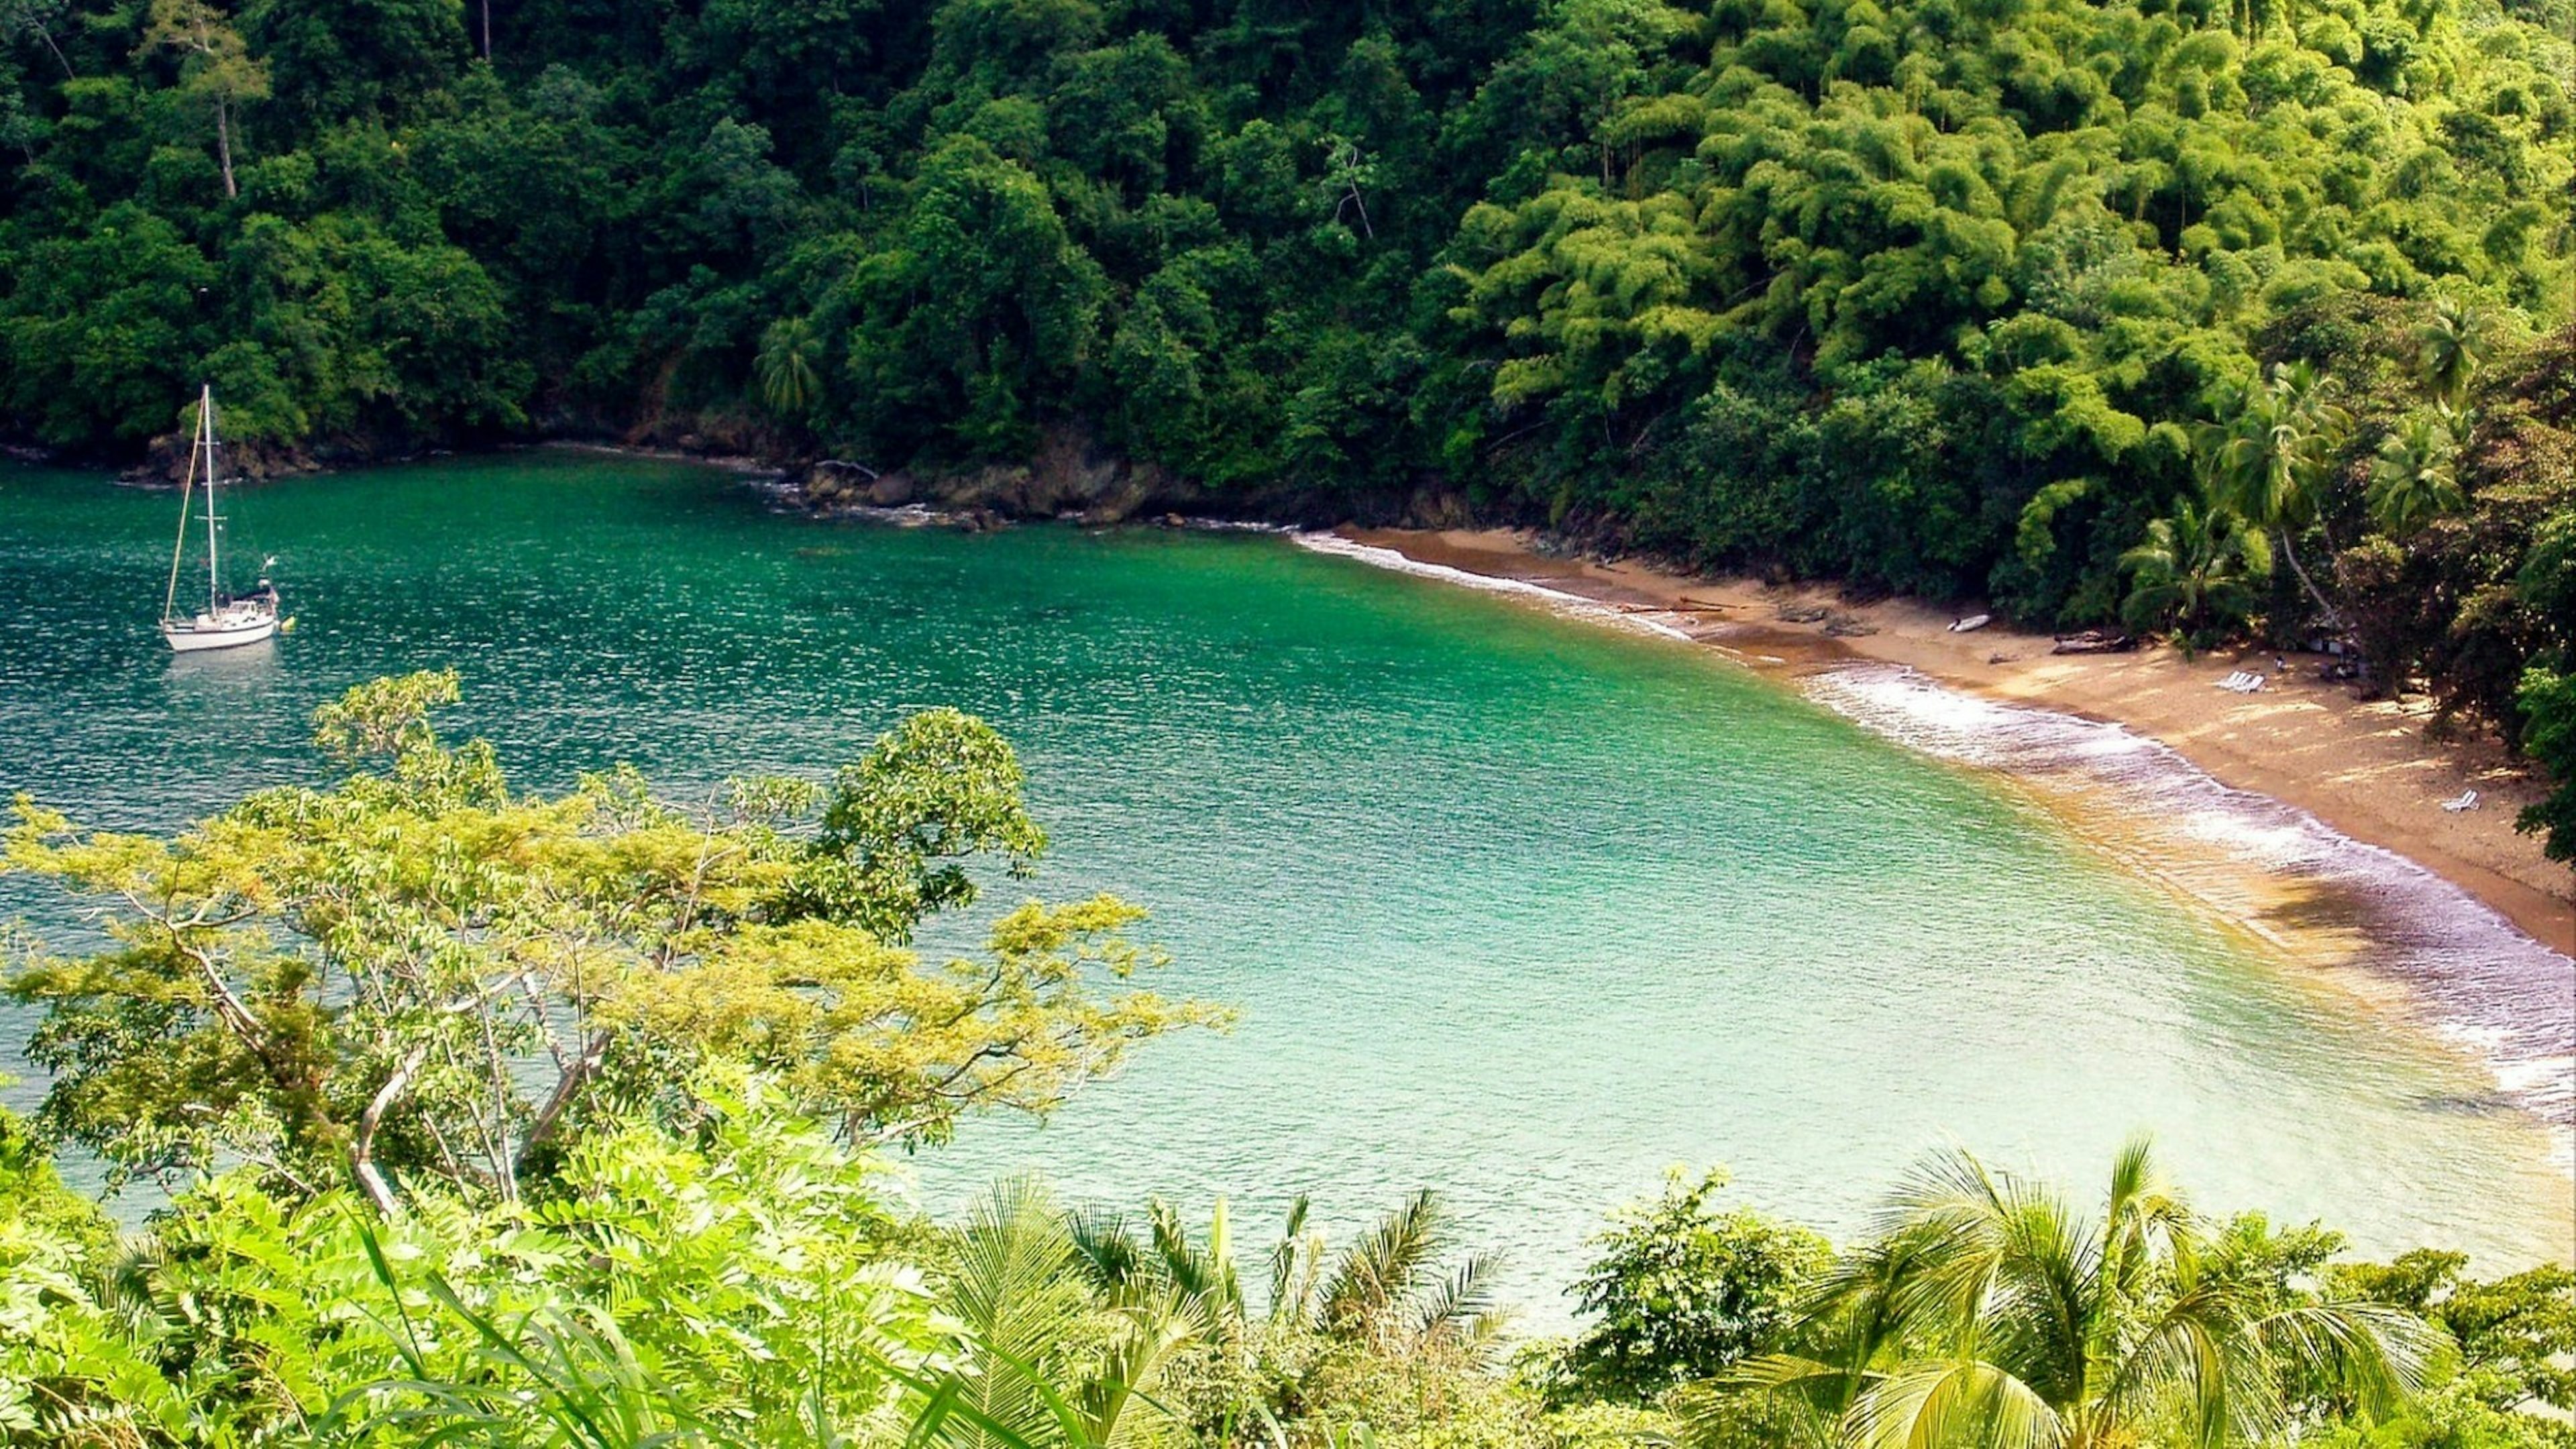 Englishman's Bay is a secluded beach on the leeward coast of Tobago in the Caribbean Ocean